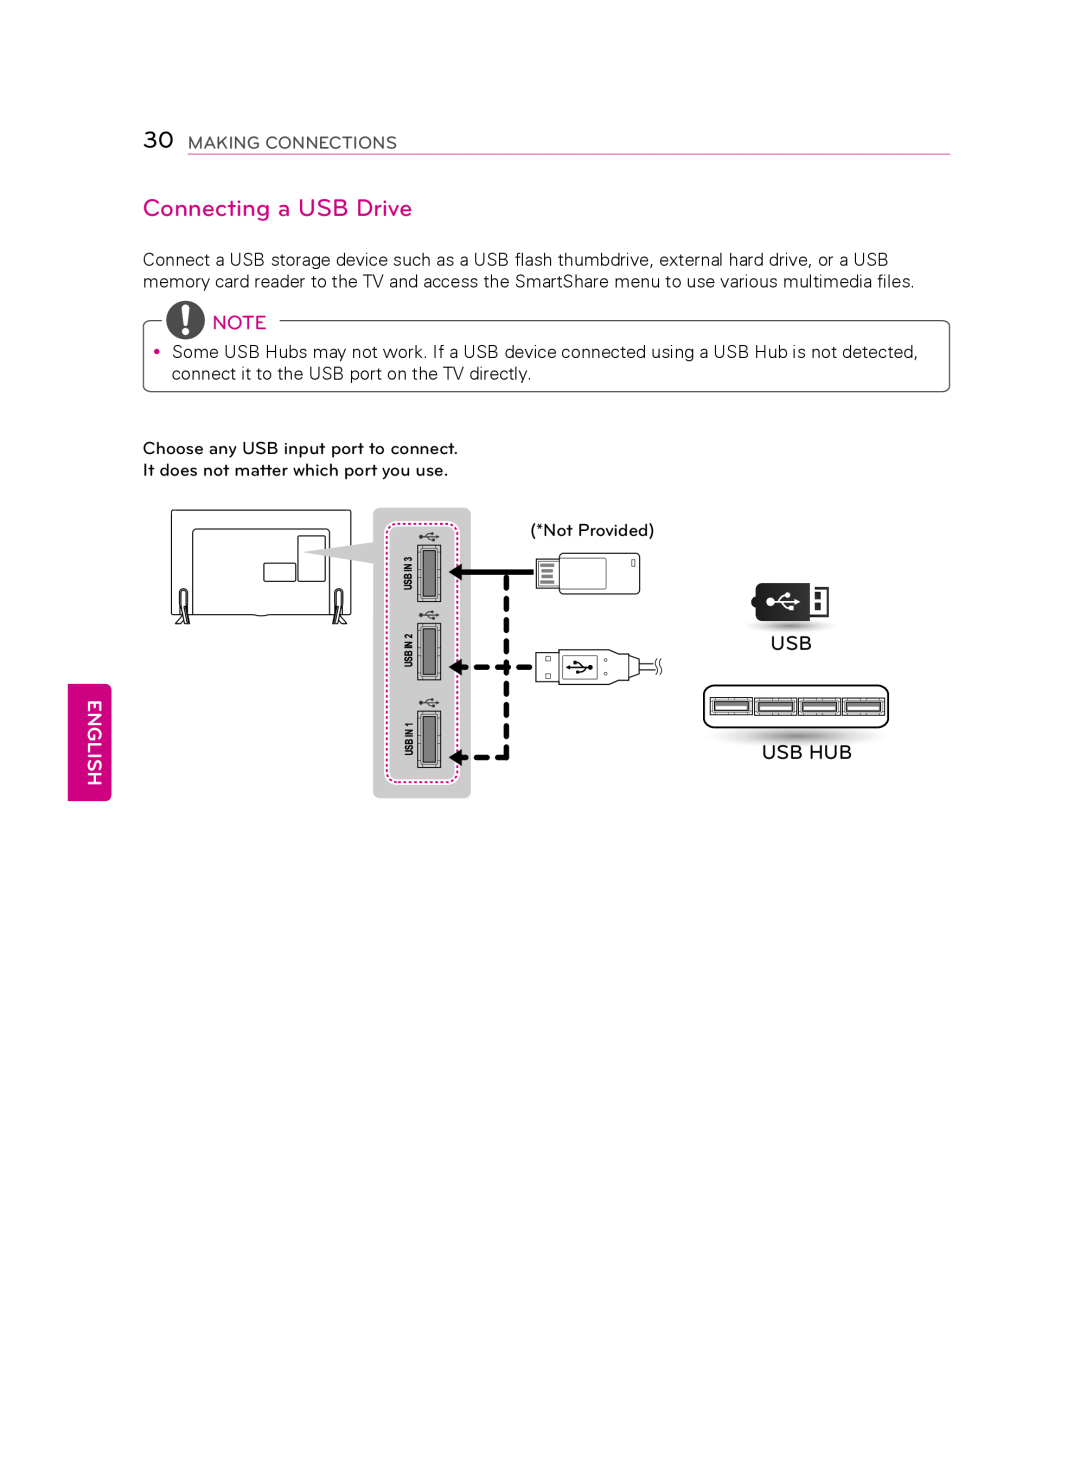 LG Electronics 50LB6300 owner manual Connecting a USB Drive, English, Making Connections 